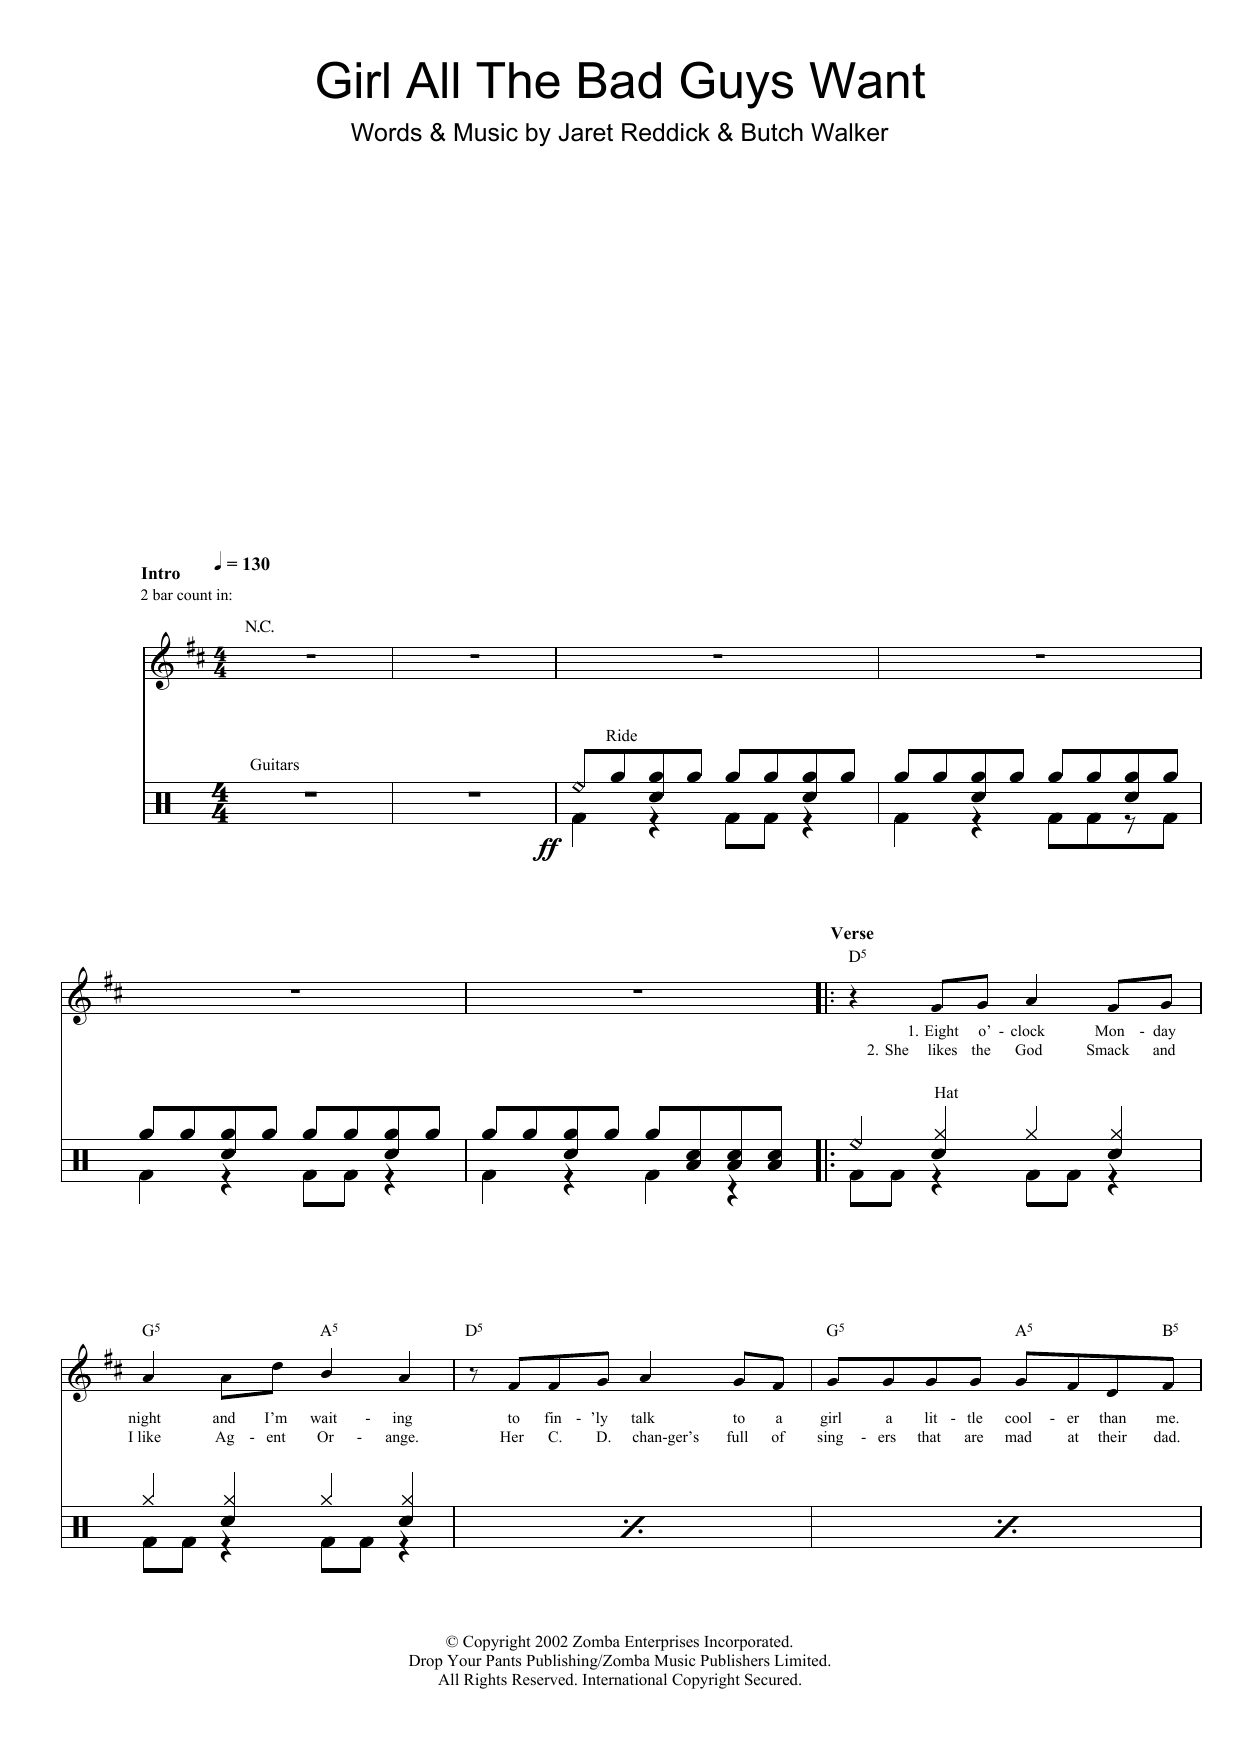 Download Bowling For Soup Girl All The Bad Guys Want Sheet Music